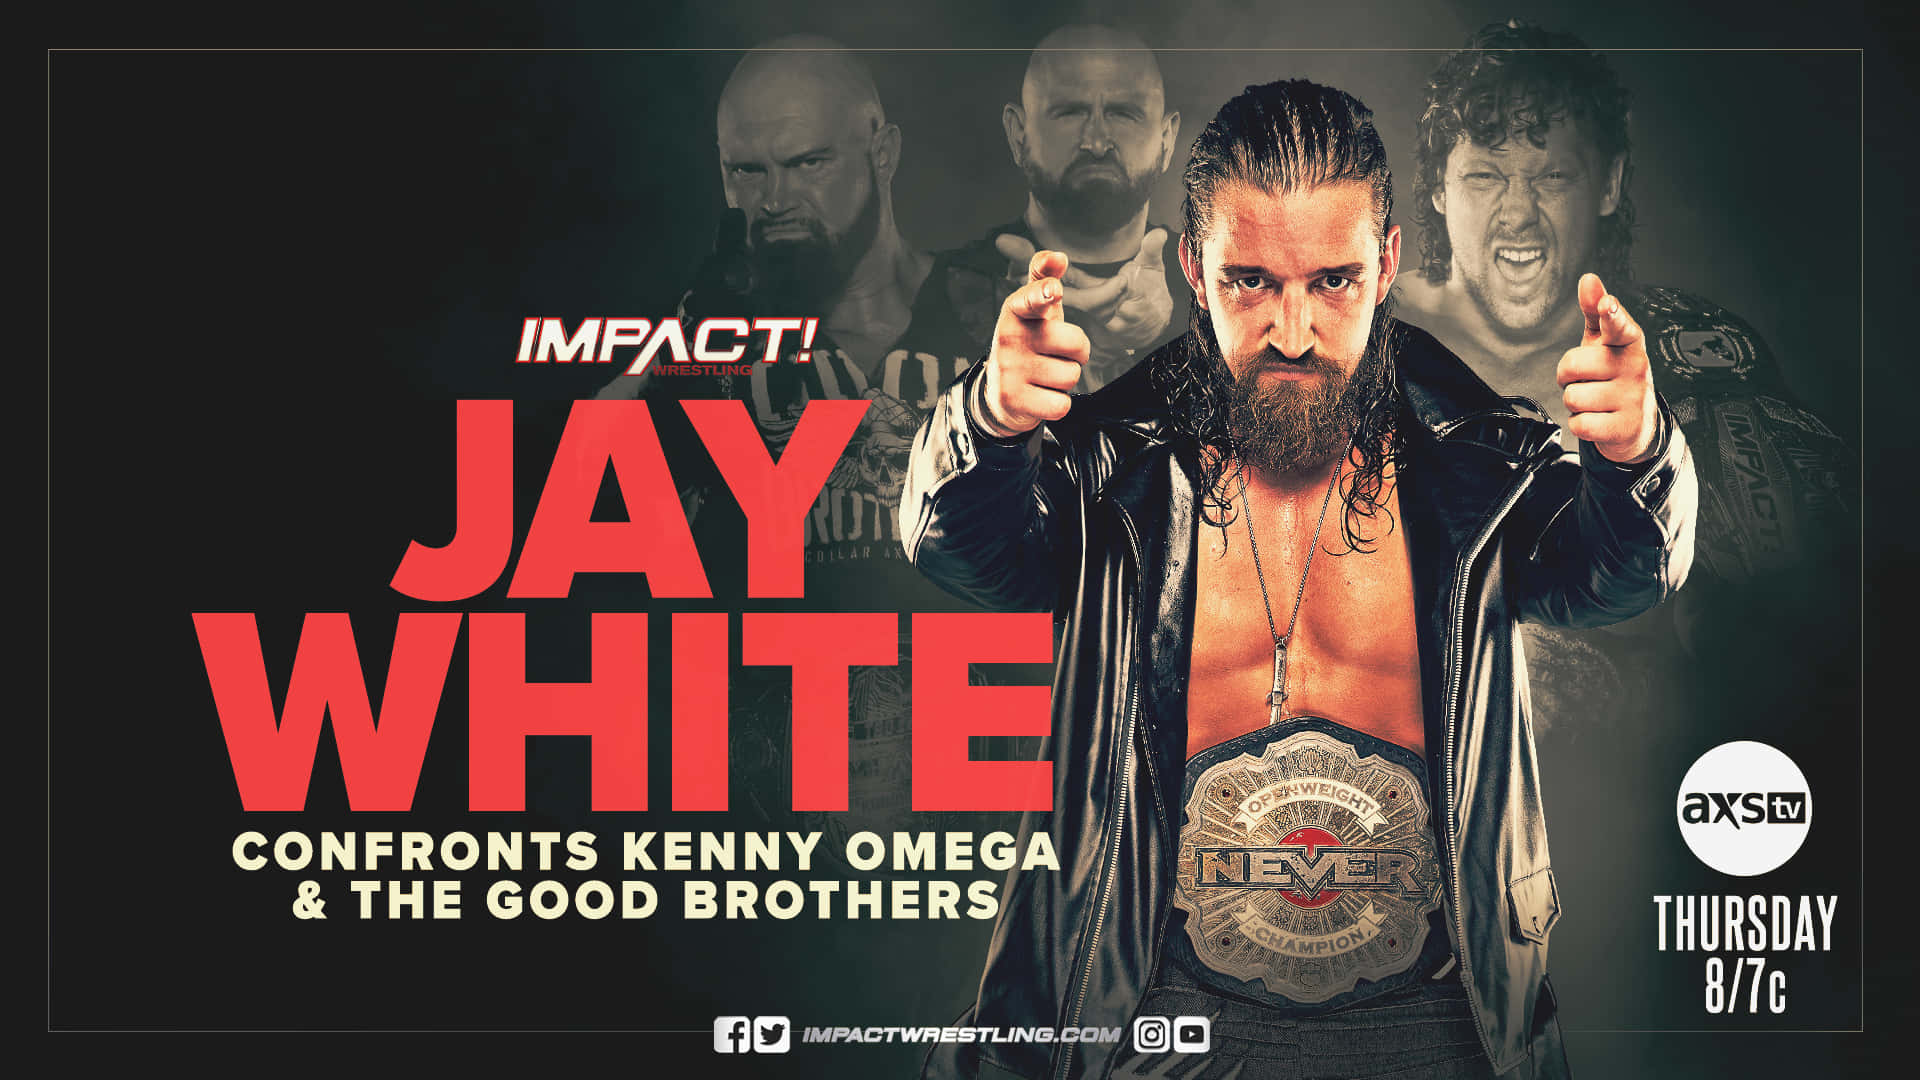 Jay White Confronts Kenny Omega Wallpaper